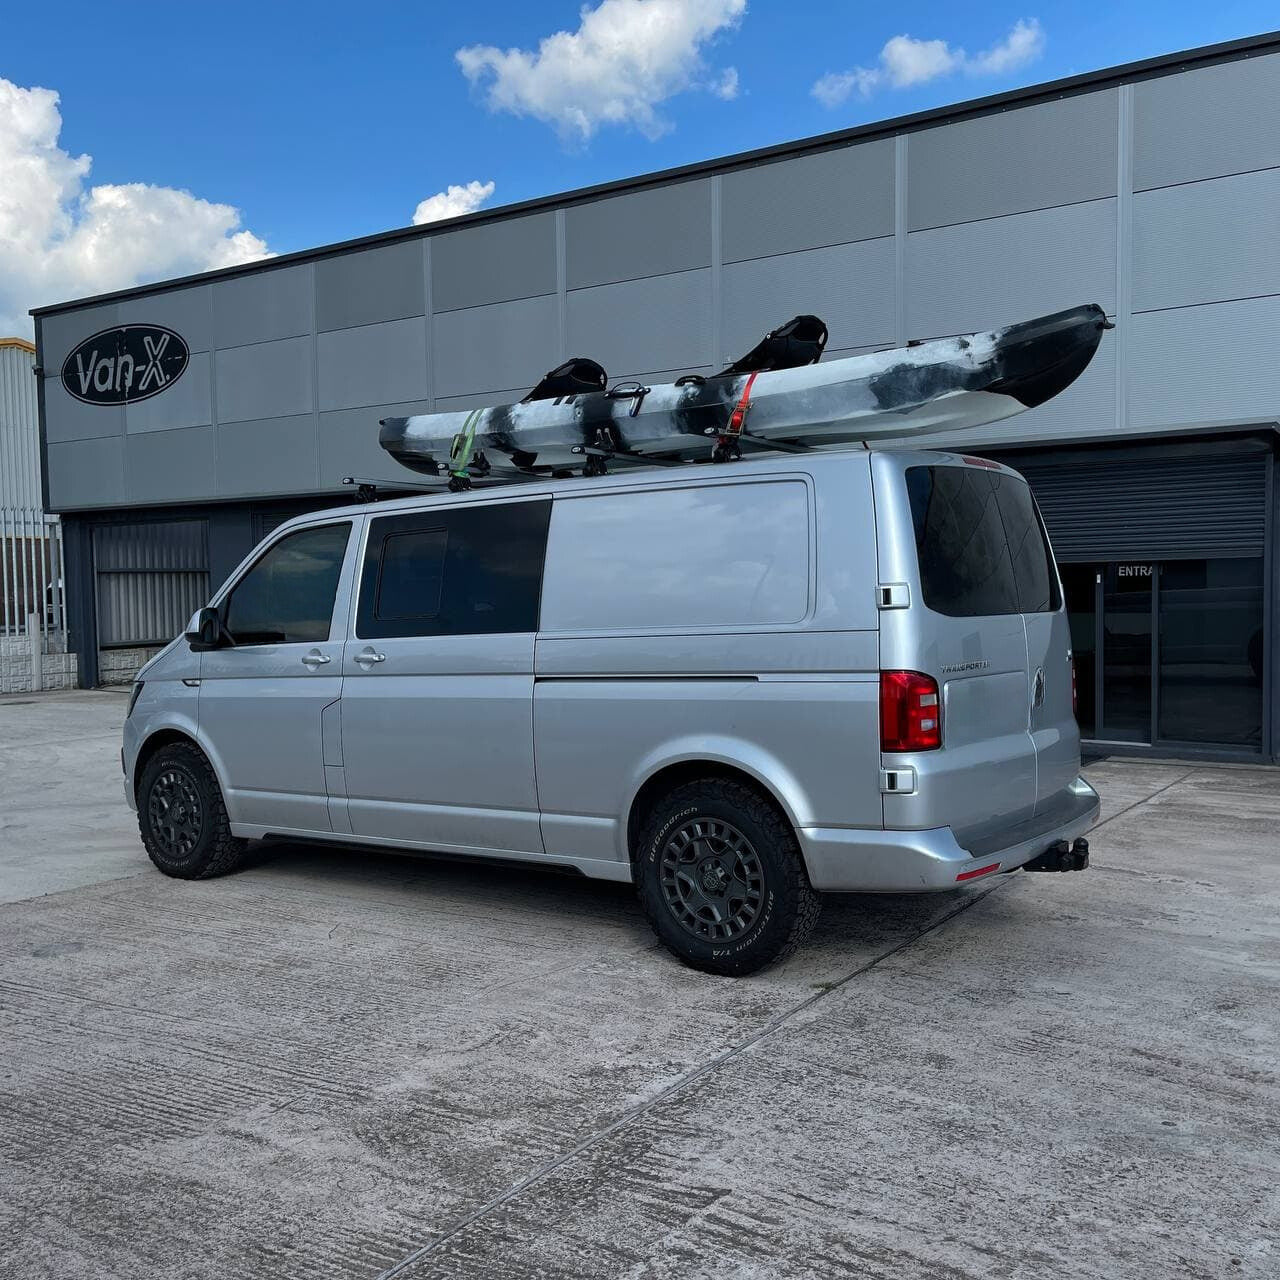 VW T6 Transporter Long wheel base Side skirts Painted Ready in Reflex Silver, Painted and Ready to Fit ABS plastic